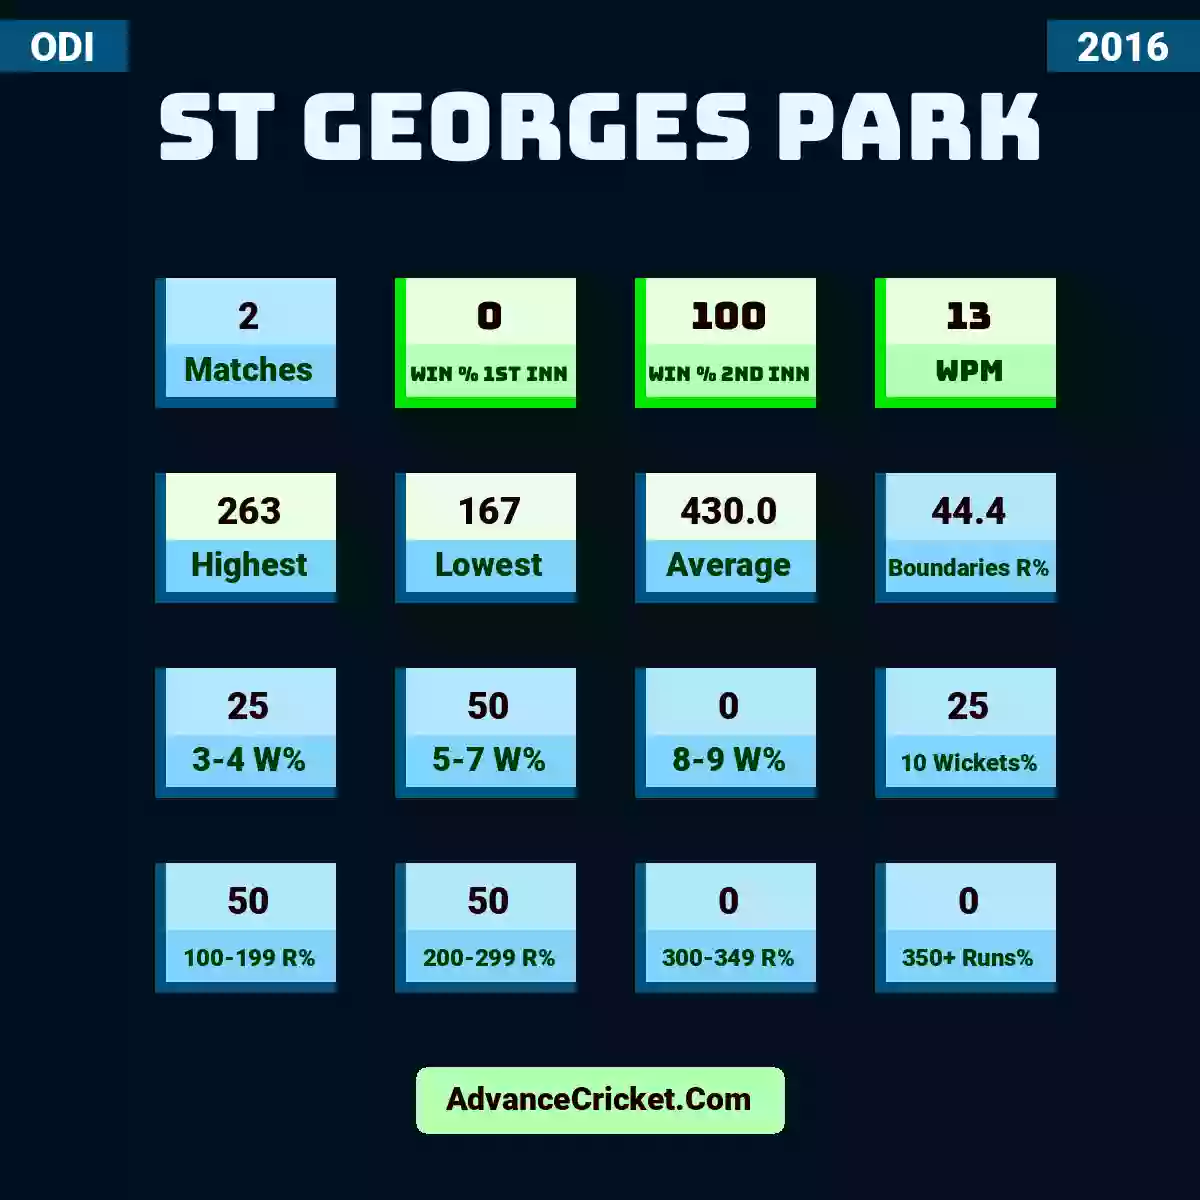 Image showing St Georges Park with Matches: 2, Win % 1st Inn: 0, Win % 2nd Inn: 100, WPM: 13, Highest: 263, Lowest: 167, Average: 430.0, Boundaries R%: 44.4, 3-4 W%: 25, 5-7 W%: 50, 8-9 W%: 0, 10 Wickets%: 25, 100-199 R%: 50, 200-299 R%: 50, 300-349 R%: 0, 350+ Runs%: 0.